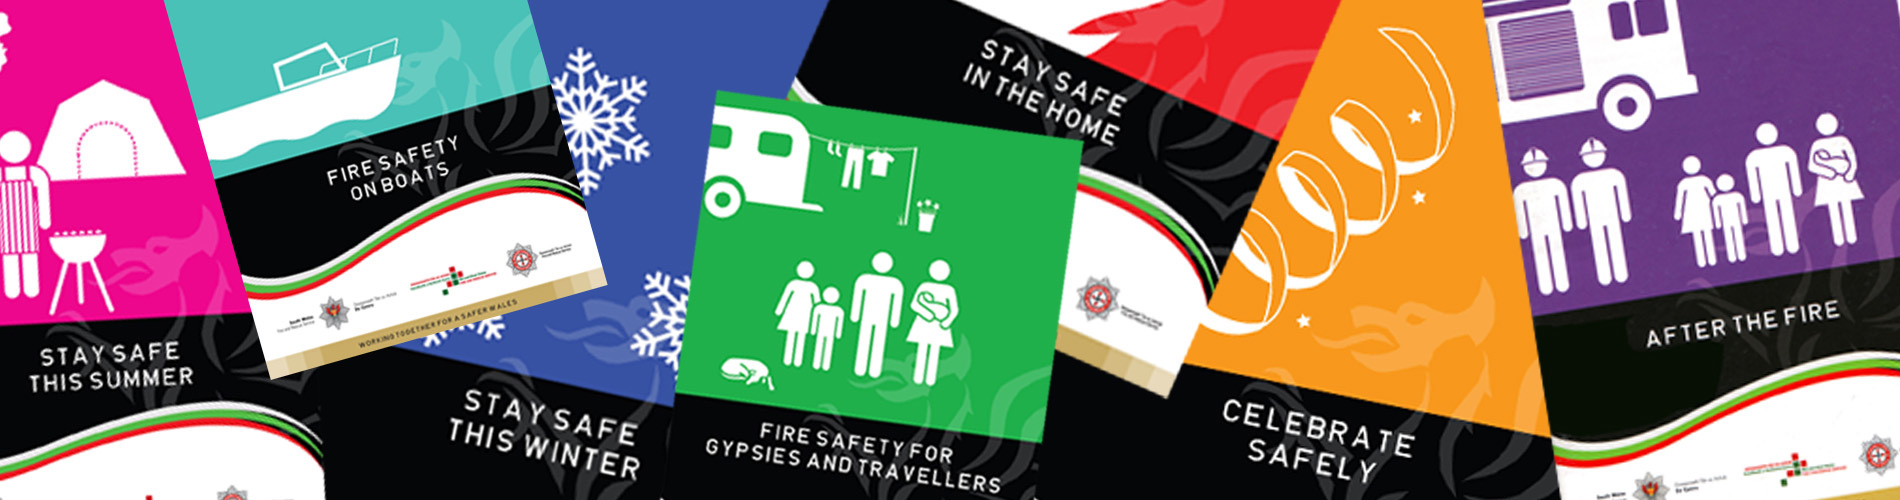 A selection of fire safety leaflets